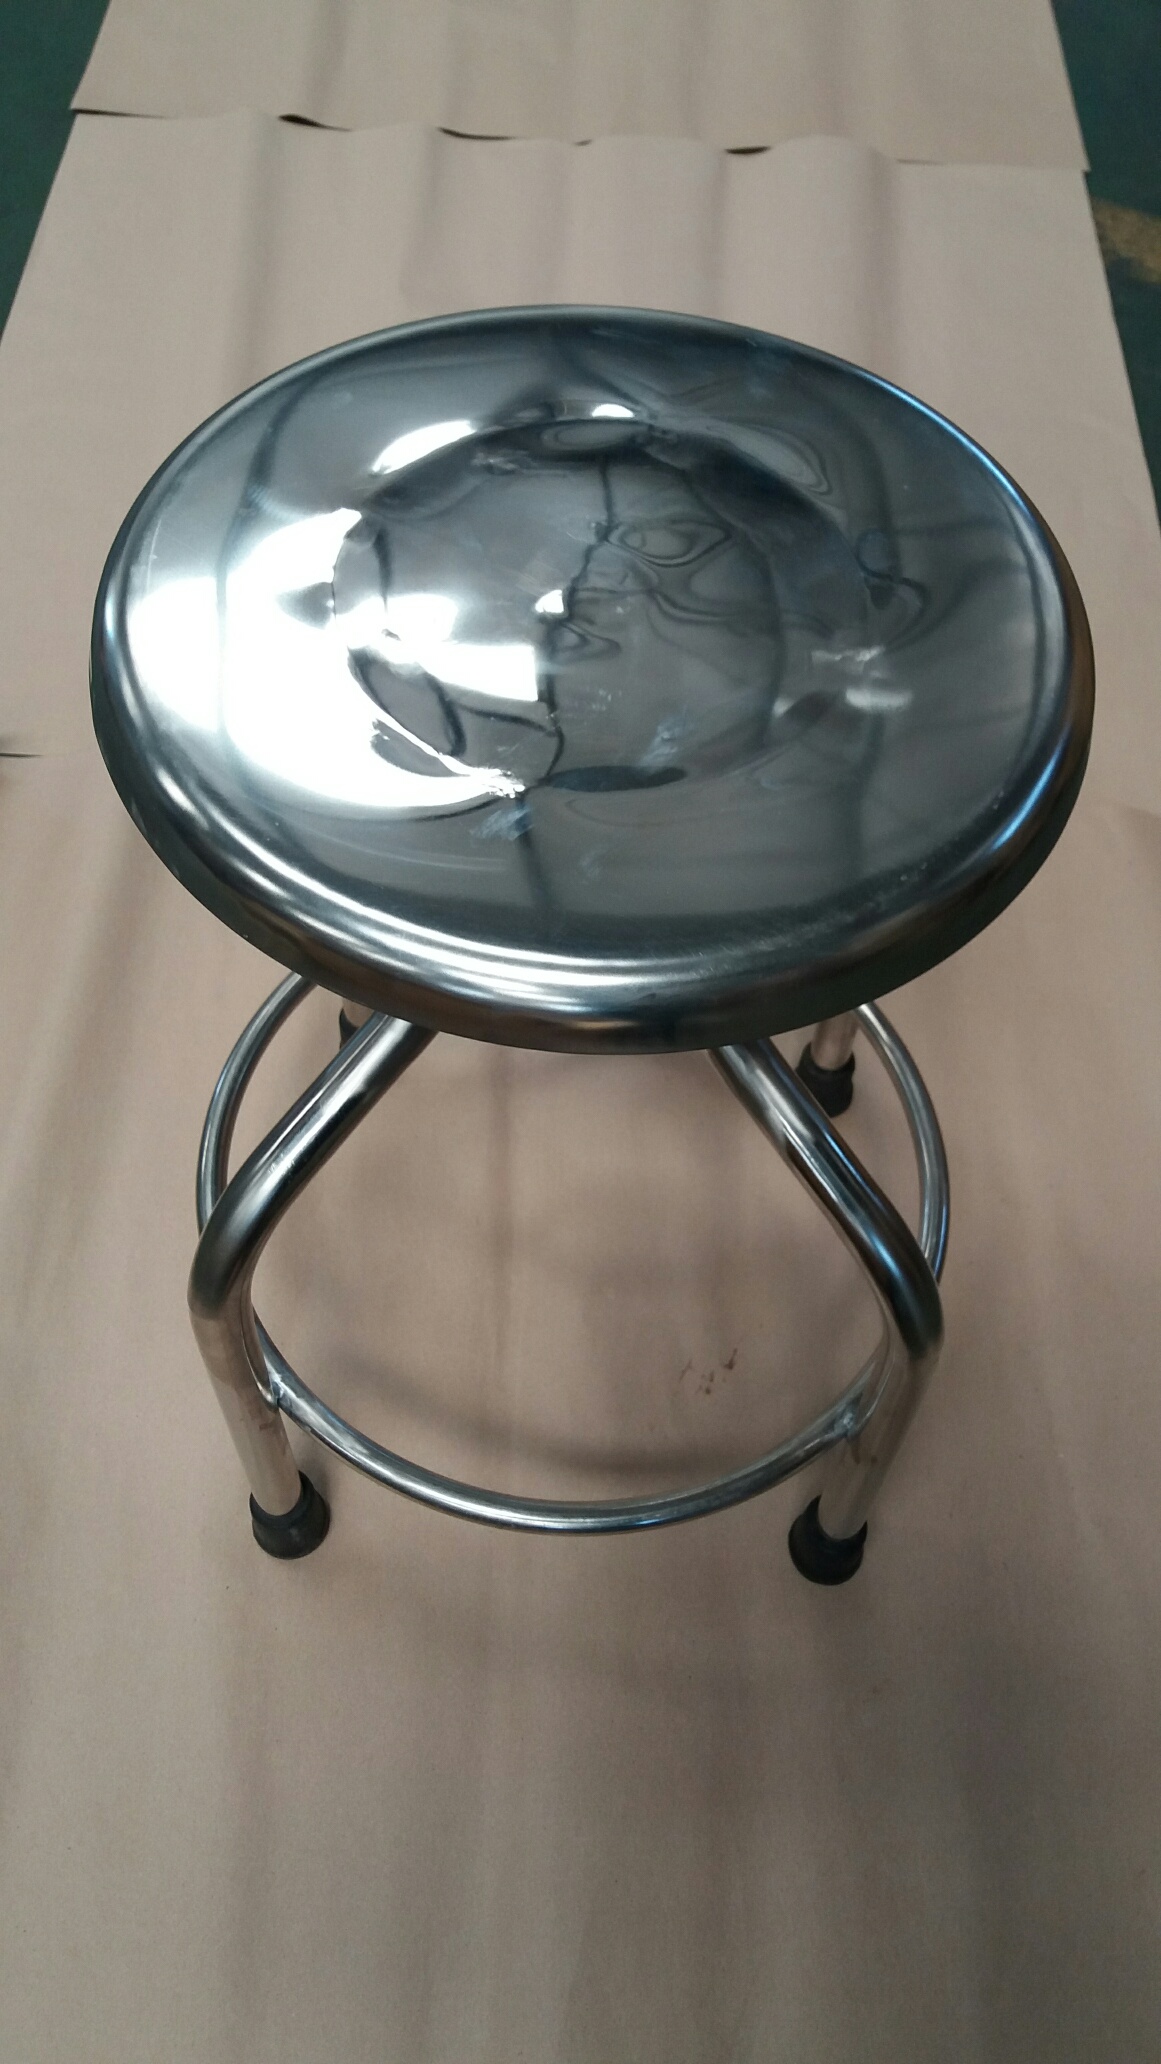 Stainless steel 4-spoke rotary chair -D340